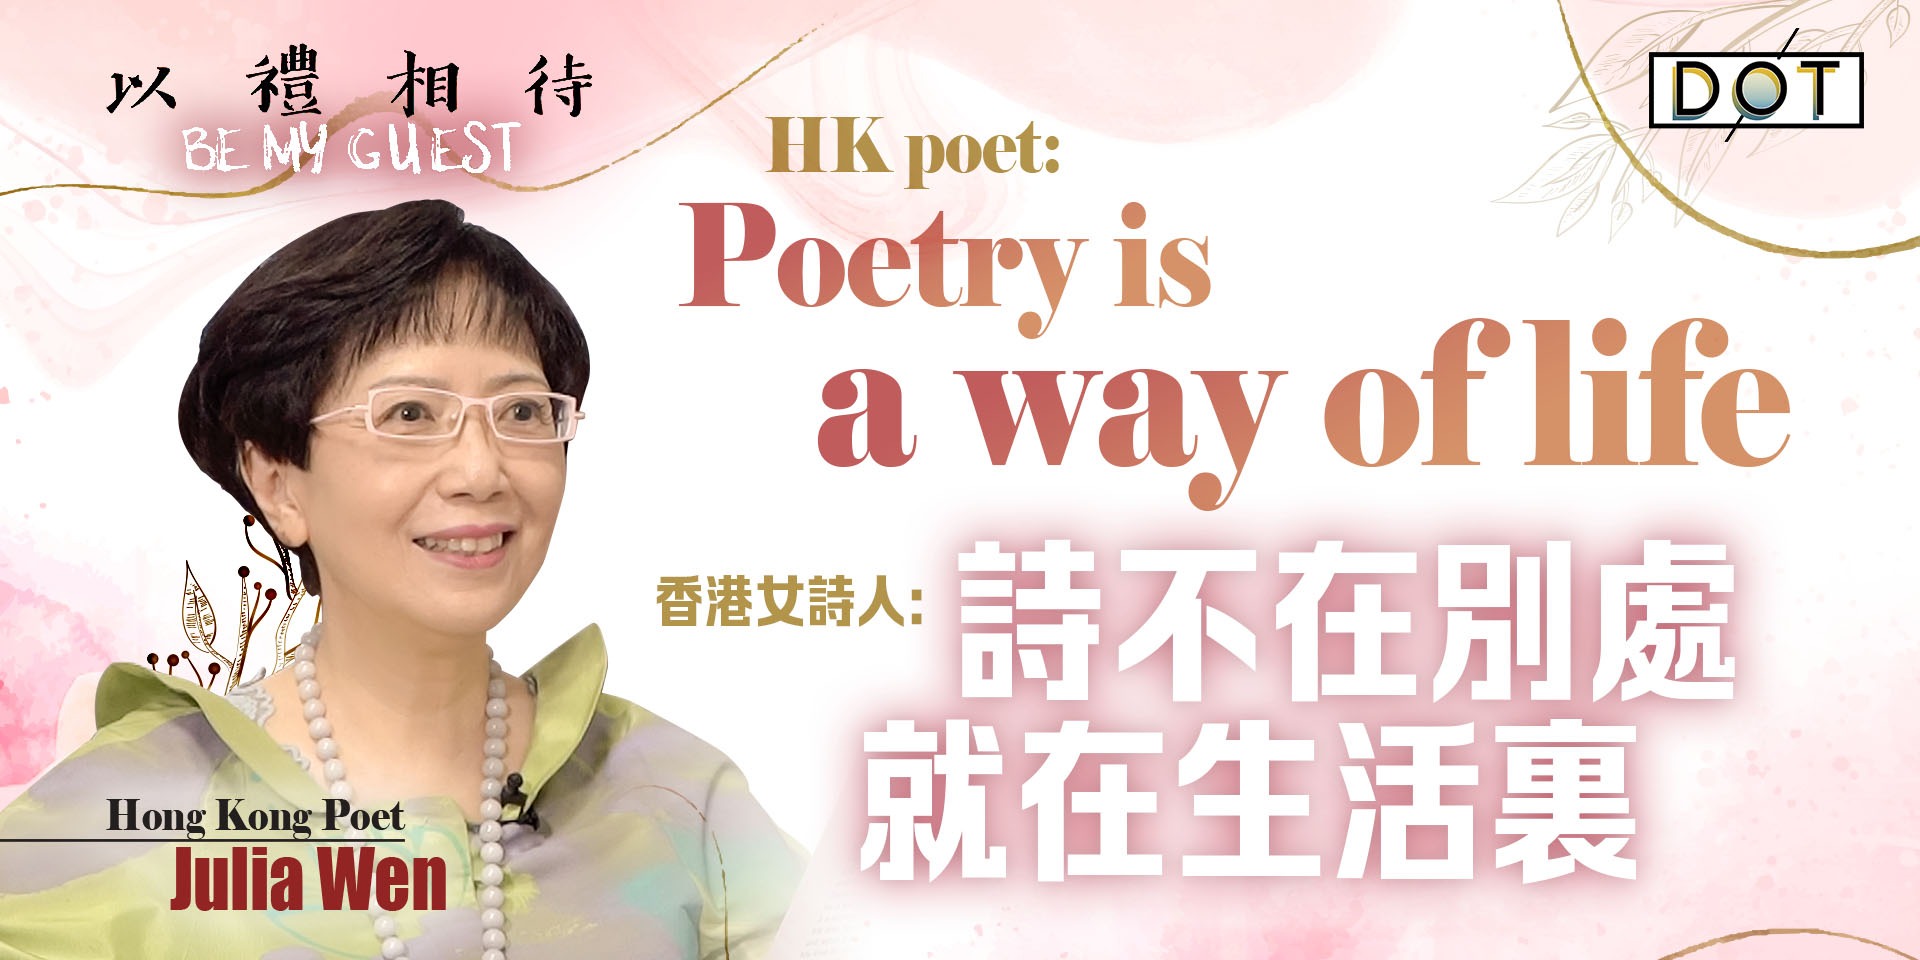 Be My Guest | HK poet: Poetry is a way of life